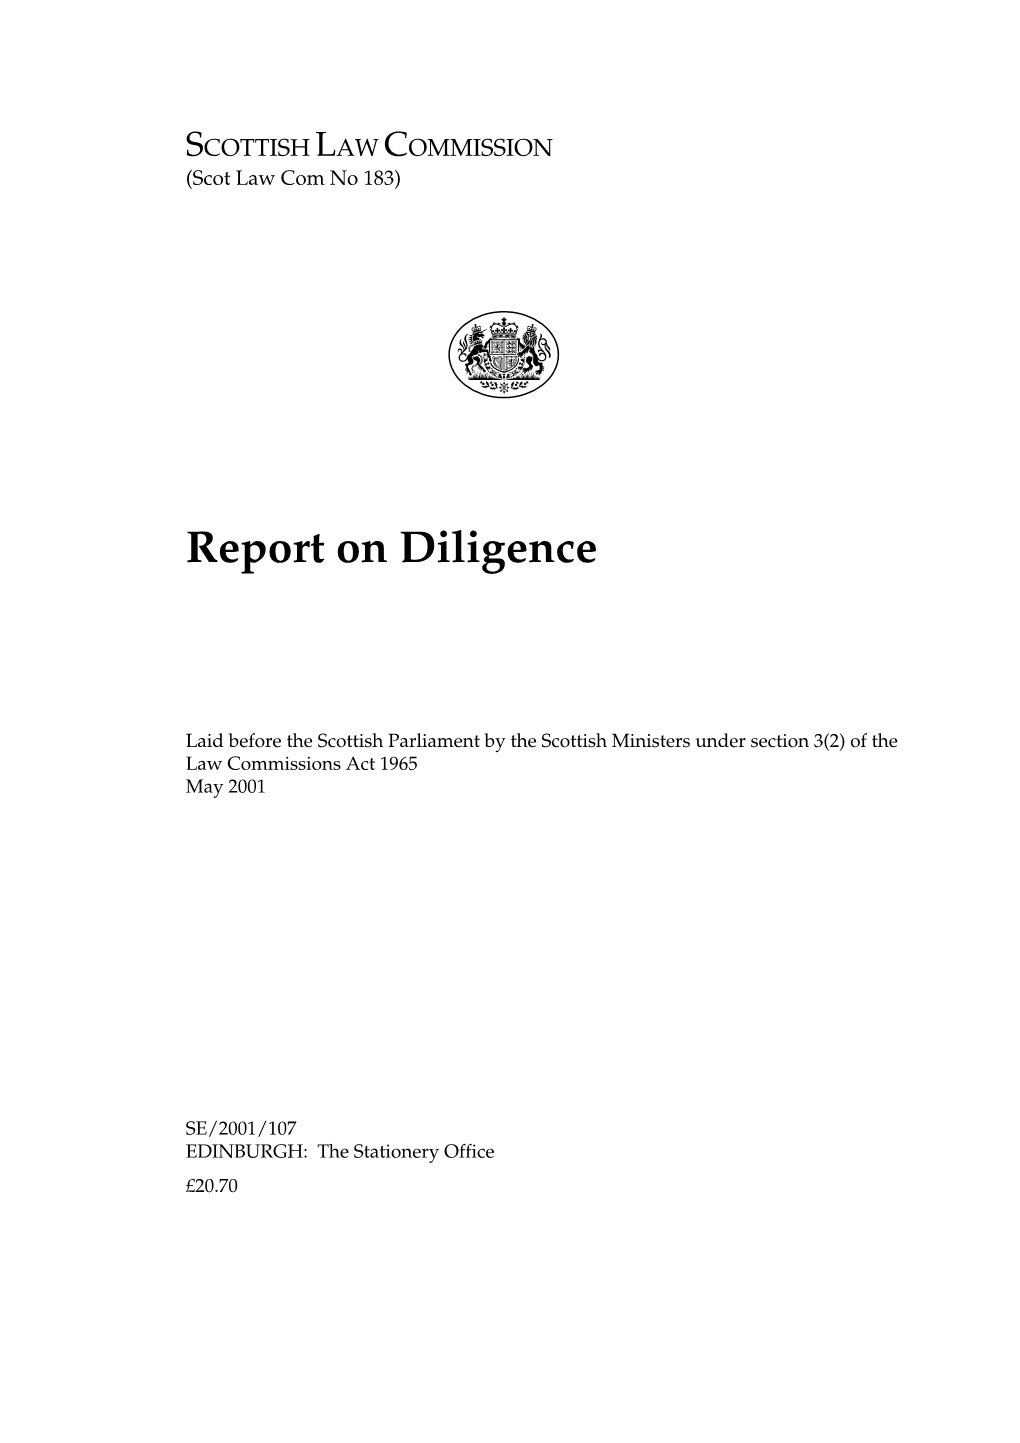 Report on Diligence